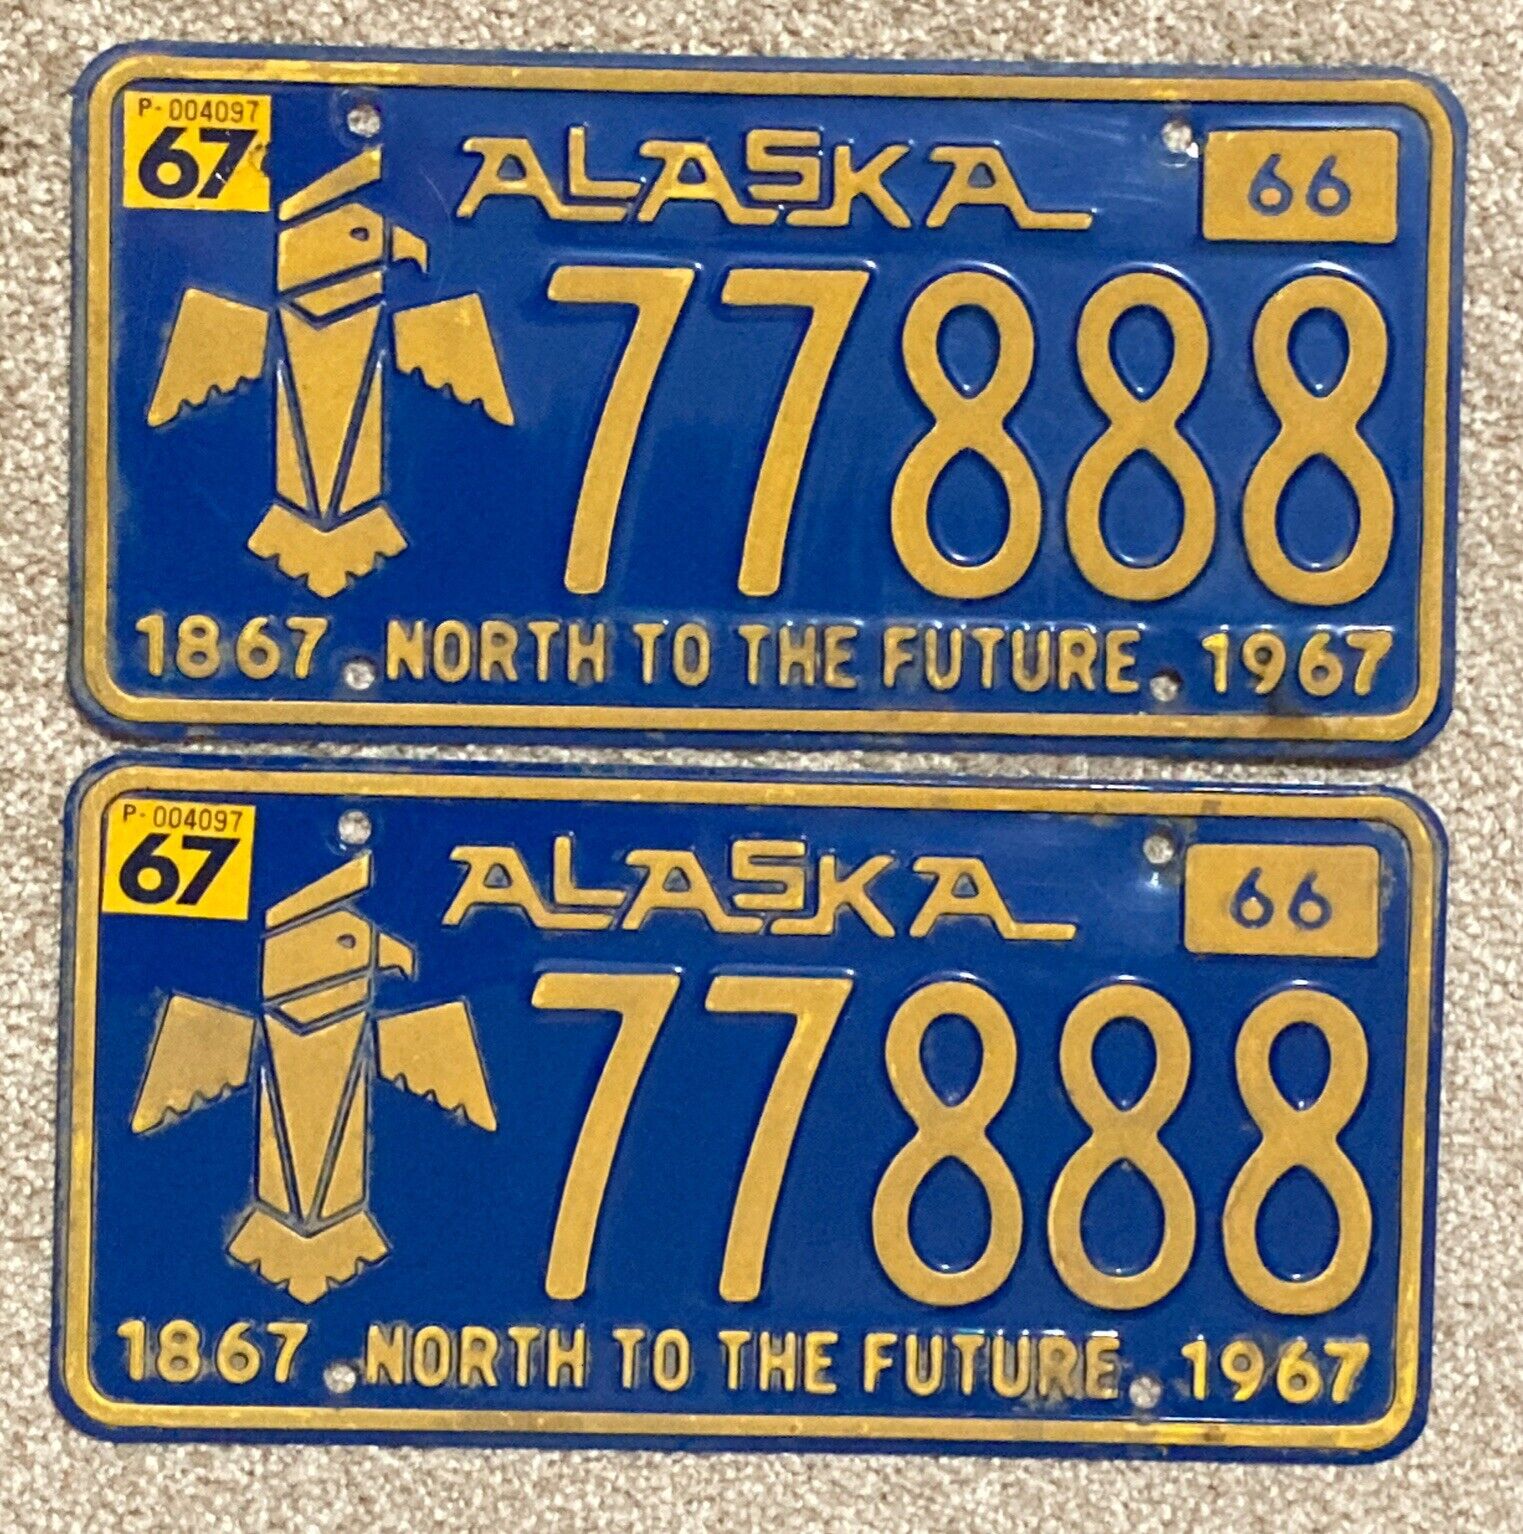 Pair of Classic 1966-1967 ALASKA TOTEM POLE LICENSE PLATES #77888 Lucky Numbers